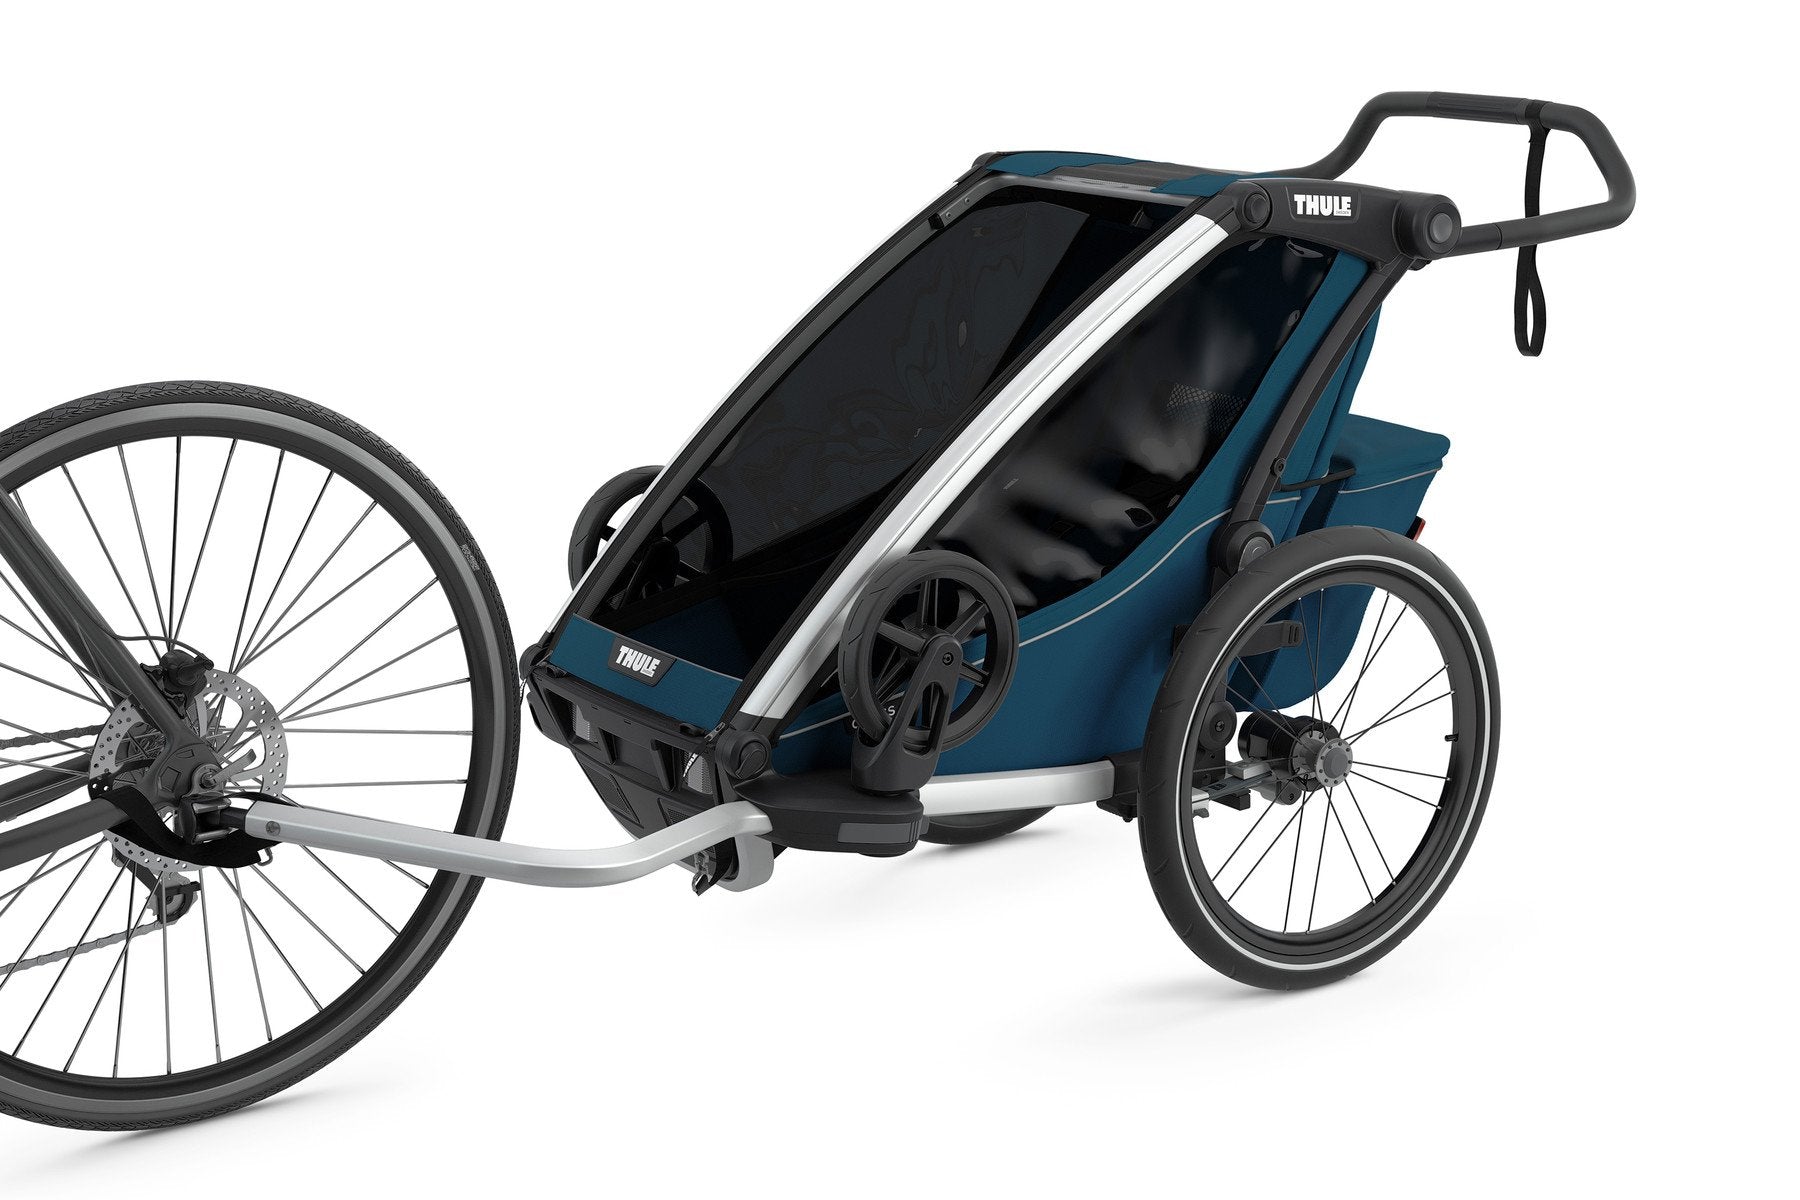 Thule Chariot Cross 1 Stroller and Bike Trailer Shown attached to Bike